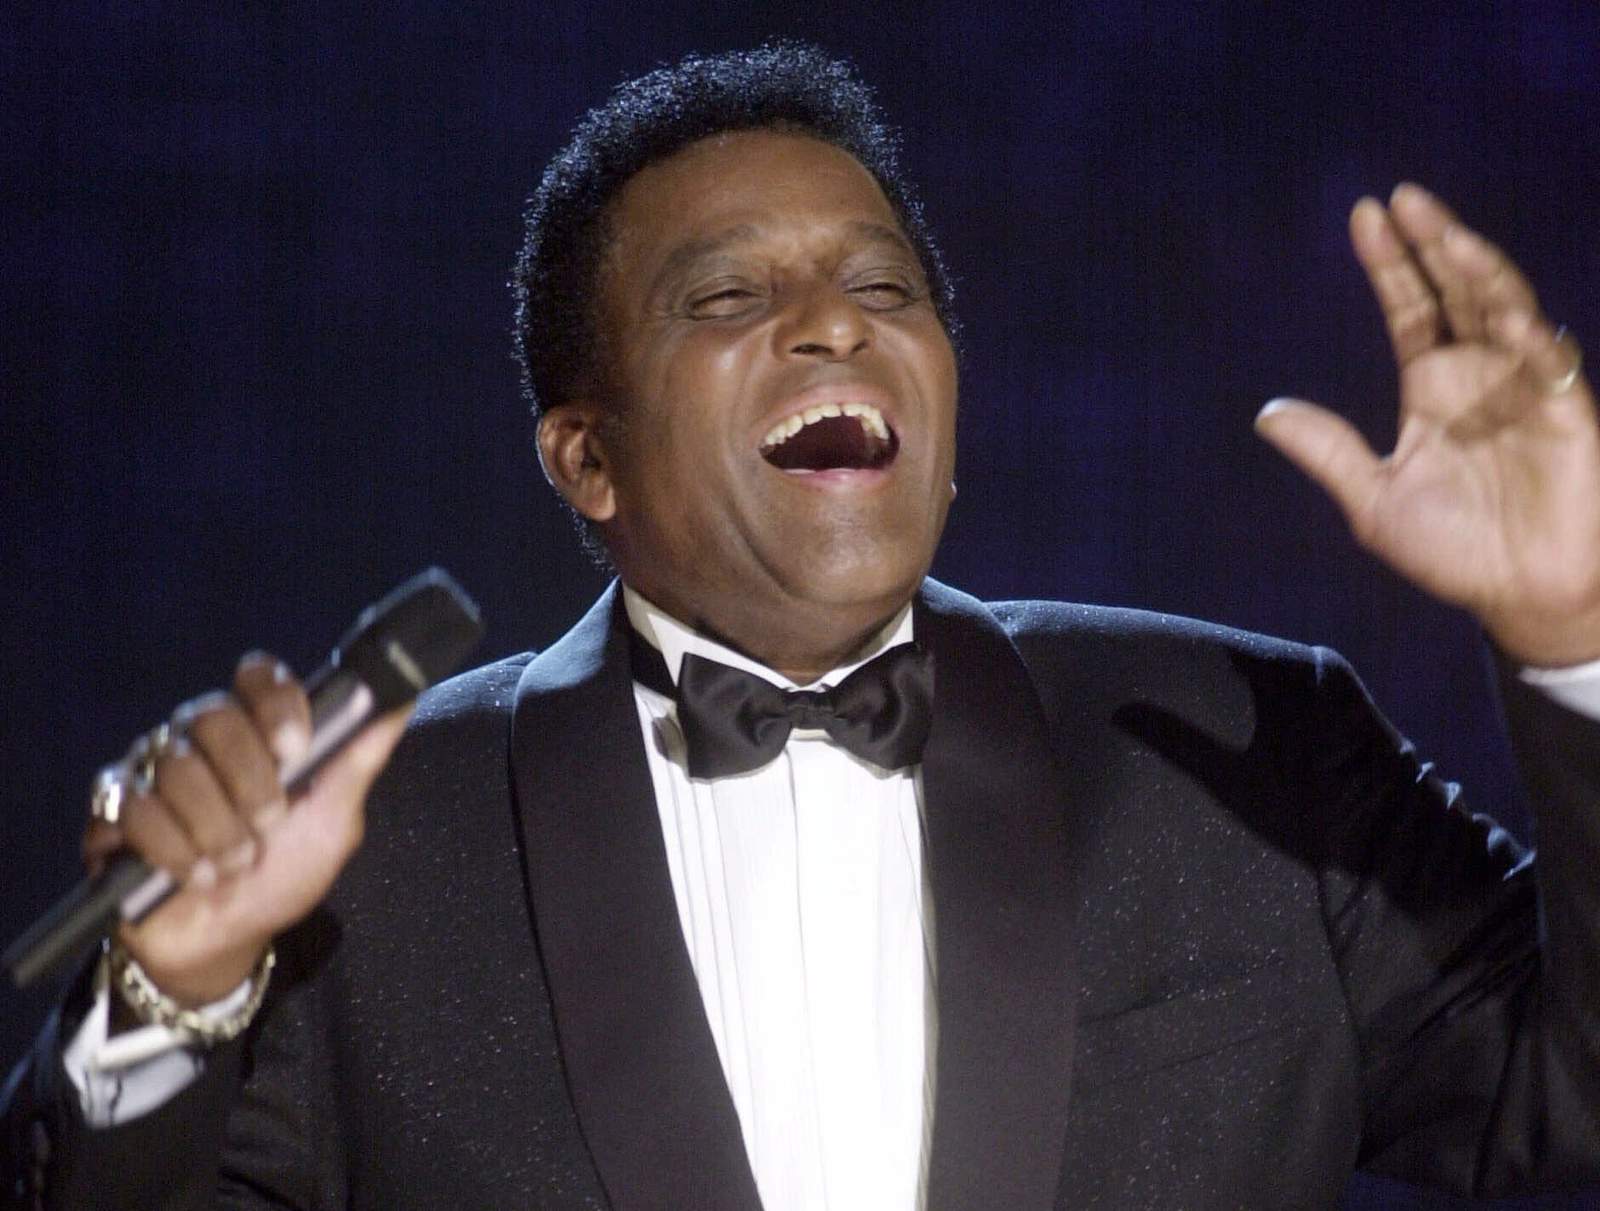 Charley Pride, country music’s first Black star, dies from COVID-19 complications at 86